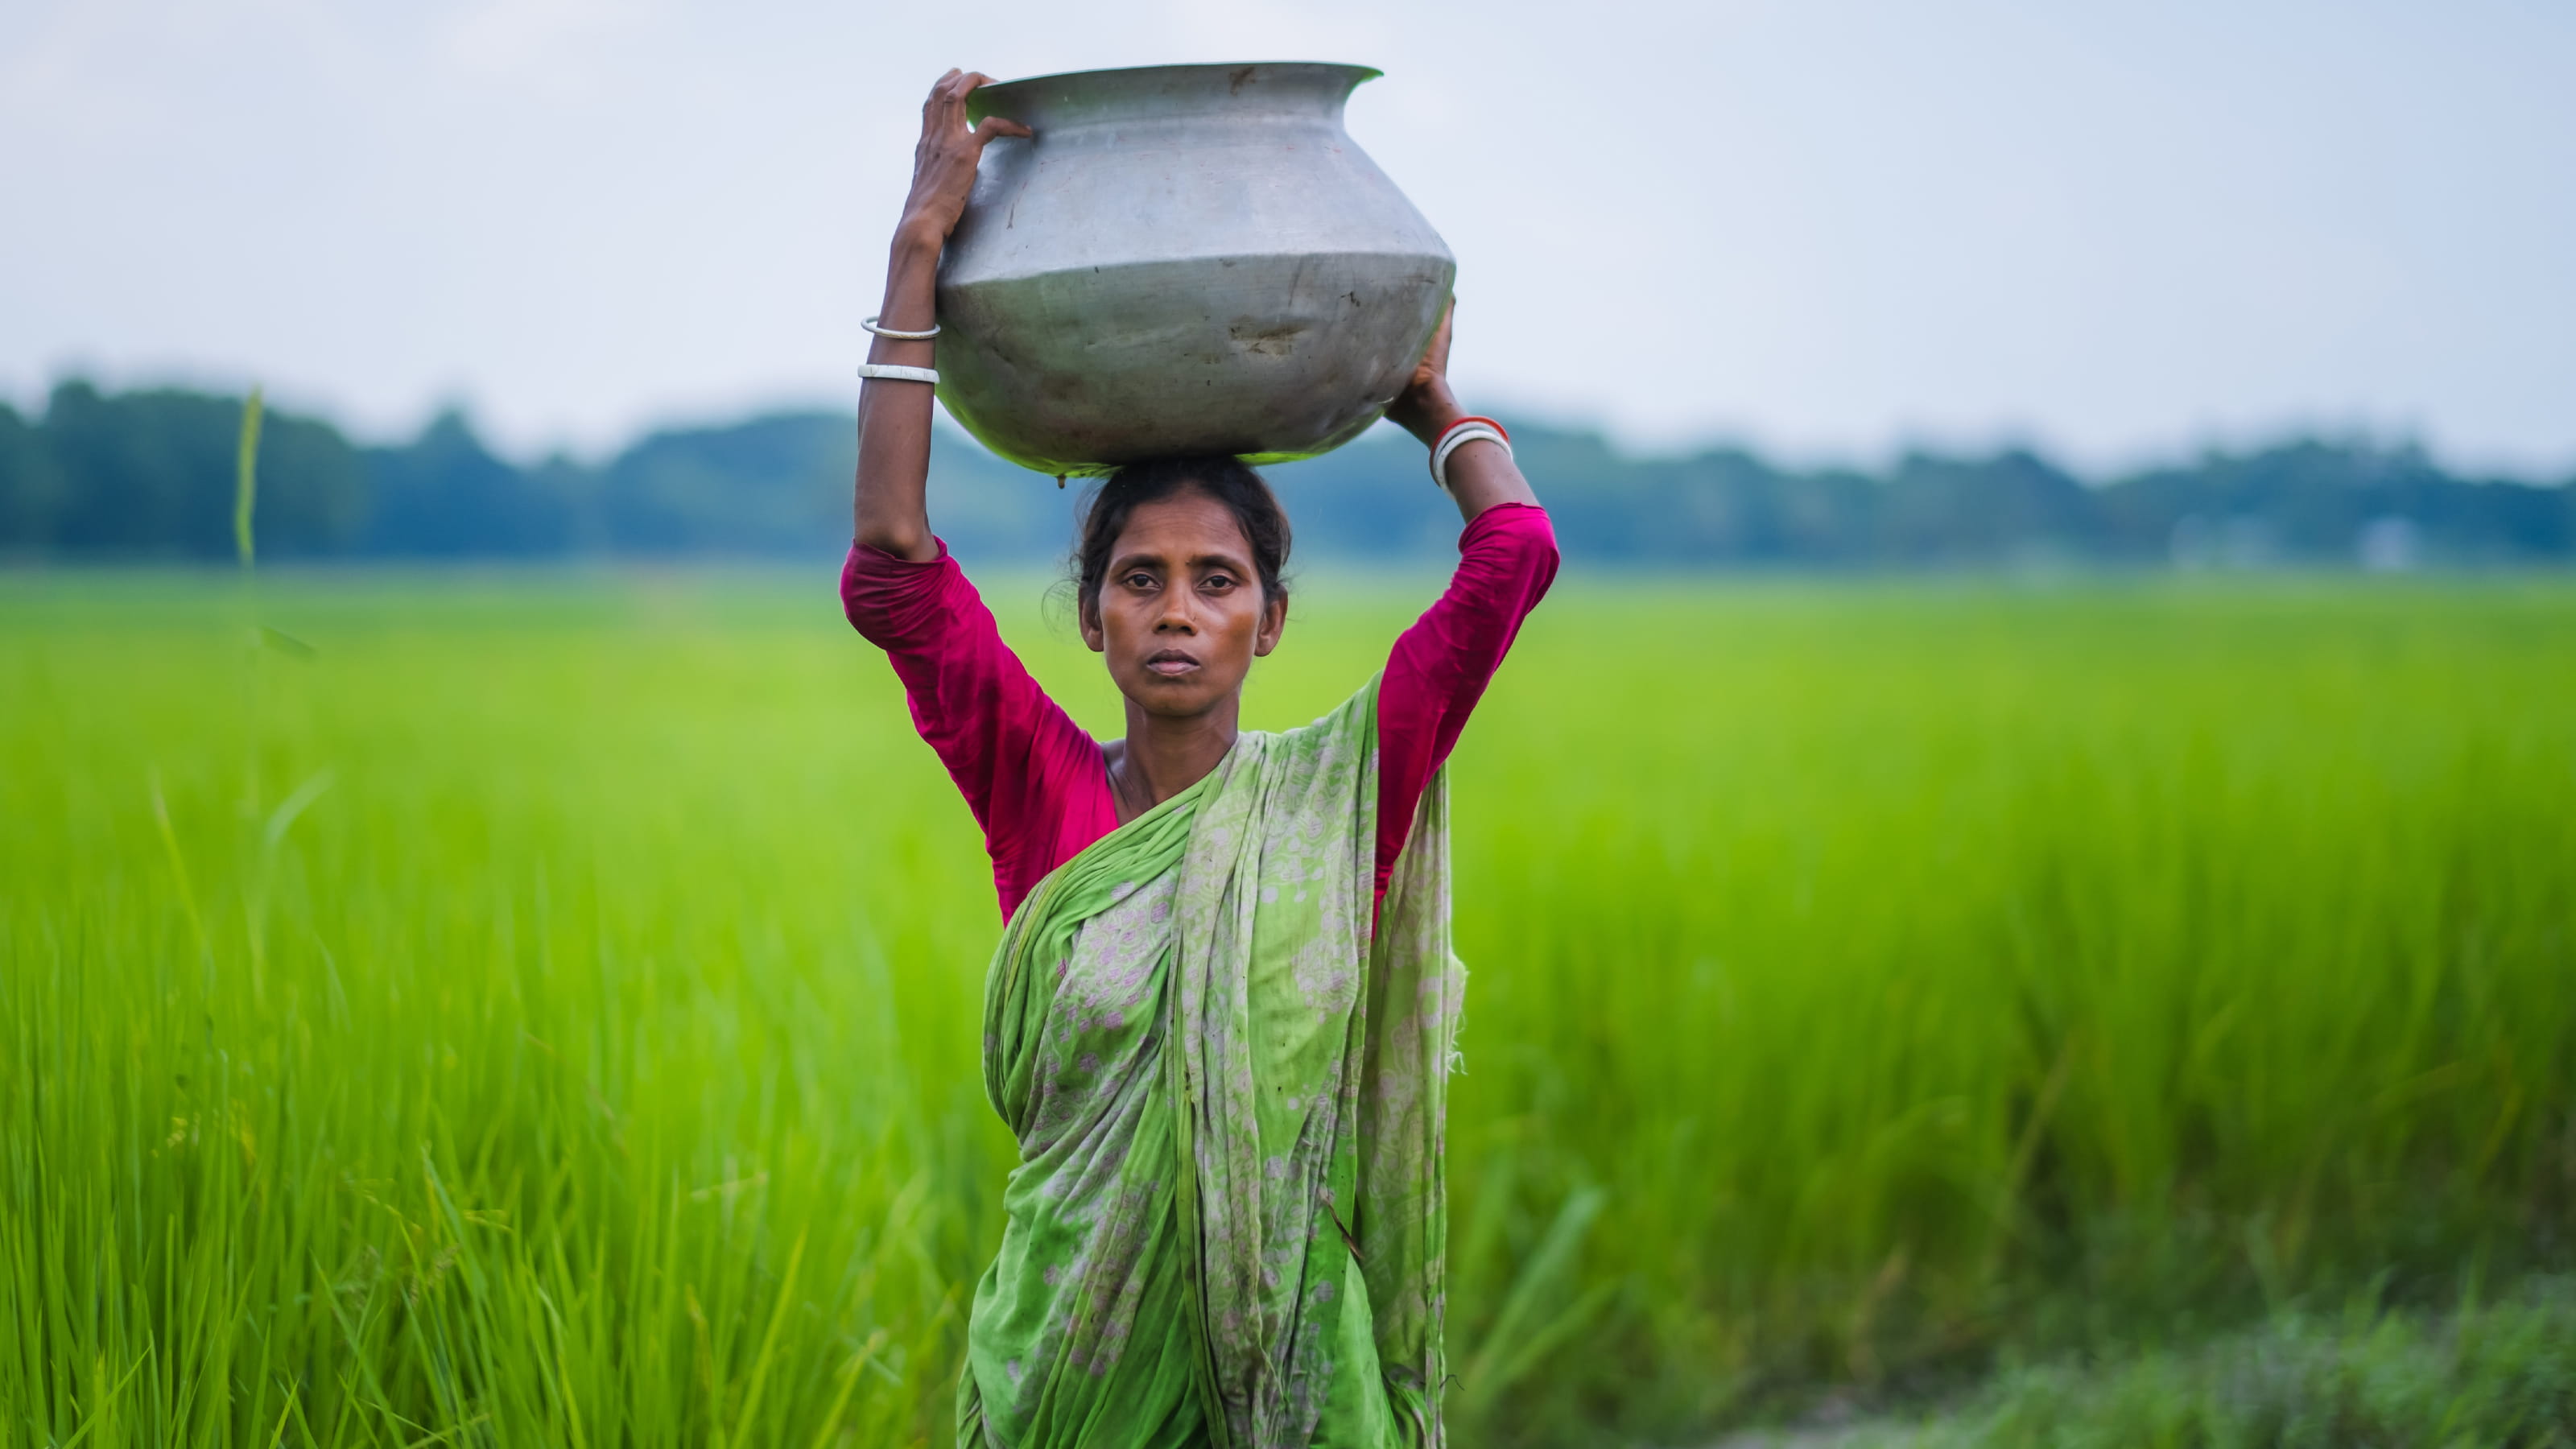 A woman in a field carrying a metal container on her head